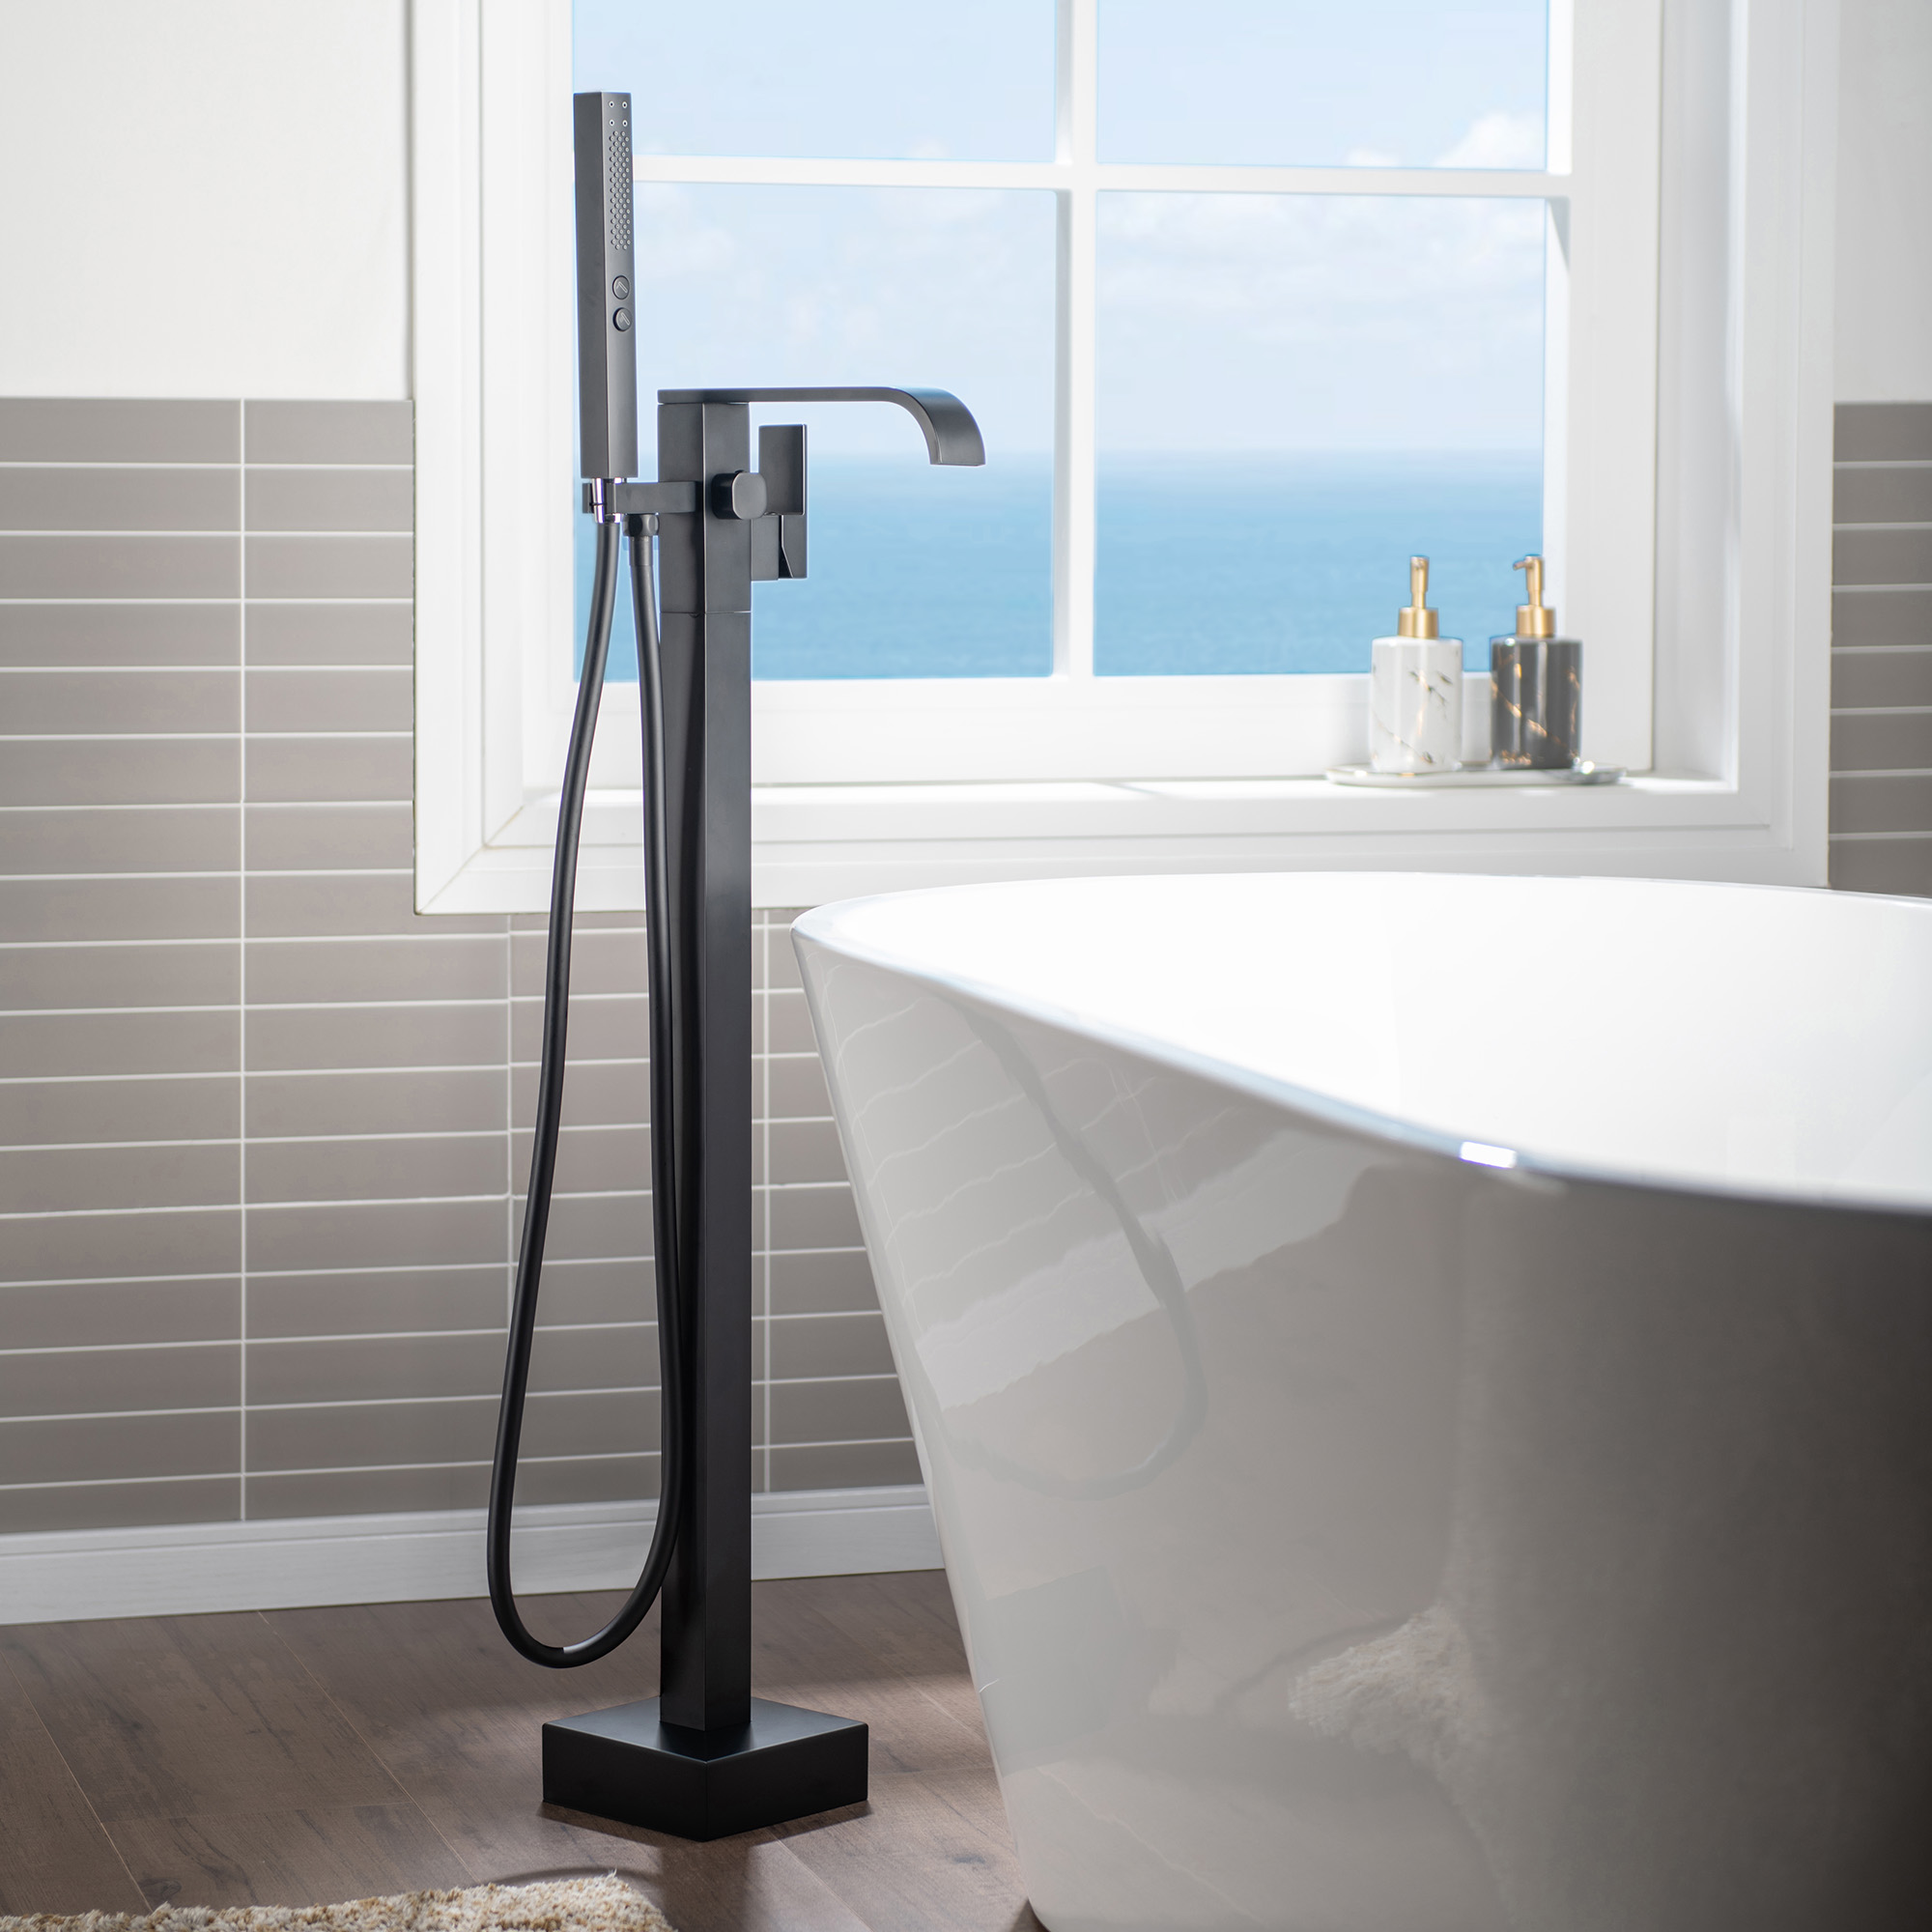 WOODBRIDGE F0038ORB Contemporary Single Handle Floor Mount Freestanding Tub Filler Faucet with Hand shower in Oil Rubbed Bronze Finish.